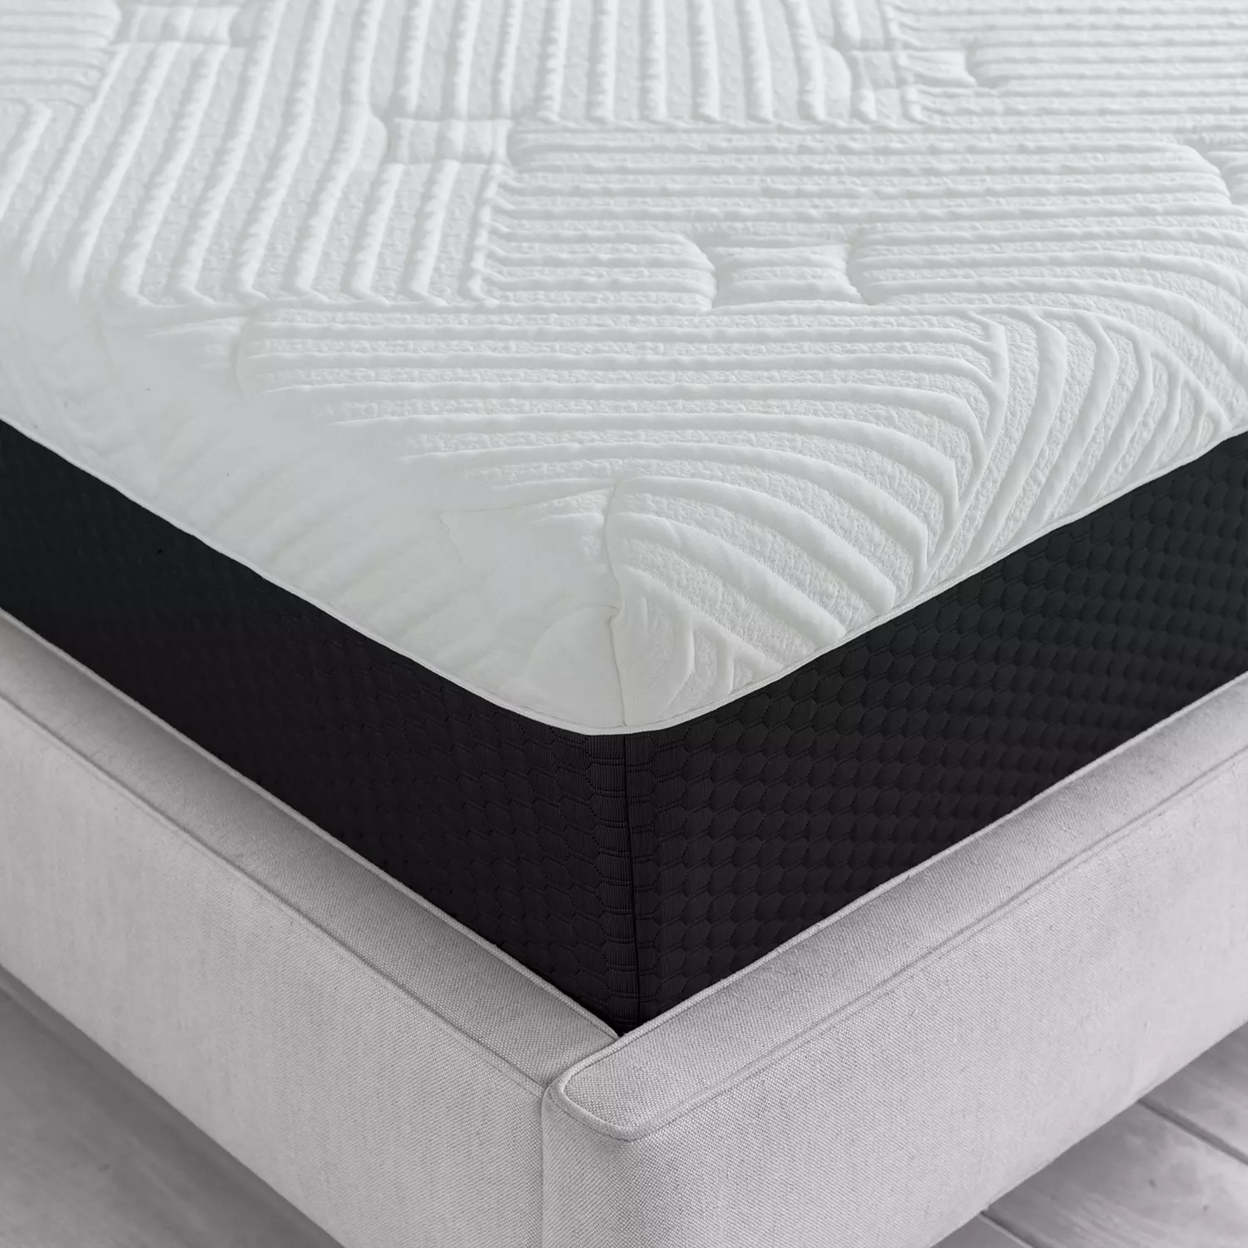 Member's Mark Hotel Premier Collection 12 Mattress, Twin